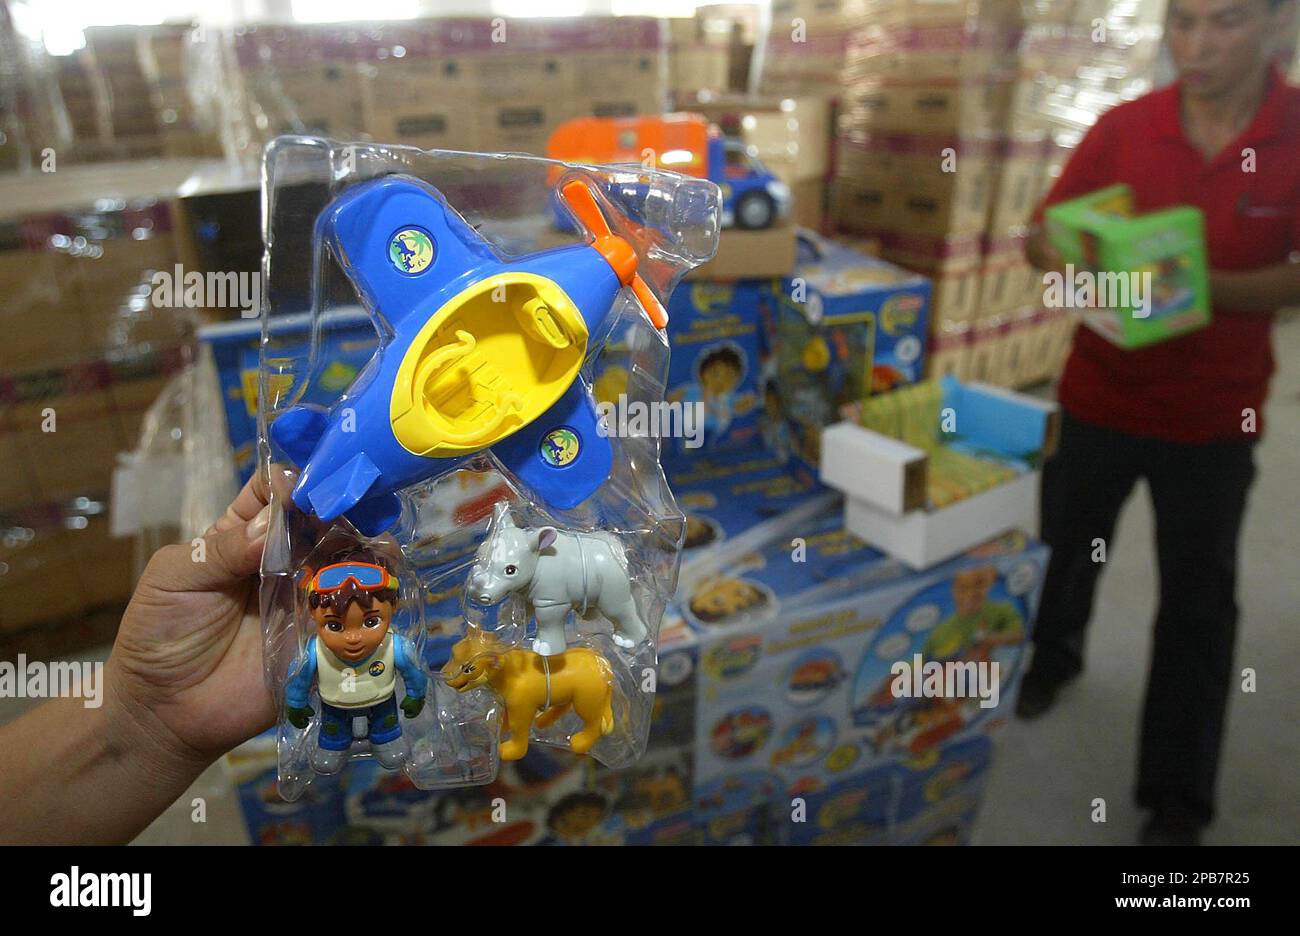 Workers display toys containing excessive lead levels at the factory of Lee Der Industrial Co. Ltd., in Foshan, in south China's Guangdong province, Sunday, Aug. 12 2007. Lee Der co-owner, Cheung Shu-hung, committed suicide on Aug. 11, following a decision by the General Administration for Quality Supervision, Inspection and Quarantine to ban exports from the factory. US company Mattel Inc. had earlier recalled 967,000 toys made by Lee Der because they were made with paint with excessive amounts of lead. (AP Photo/Color China Photo) ** CHINA OUT ** Stock Photo